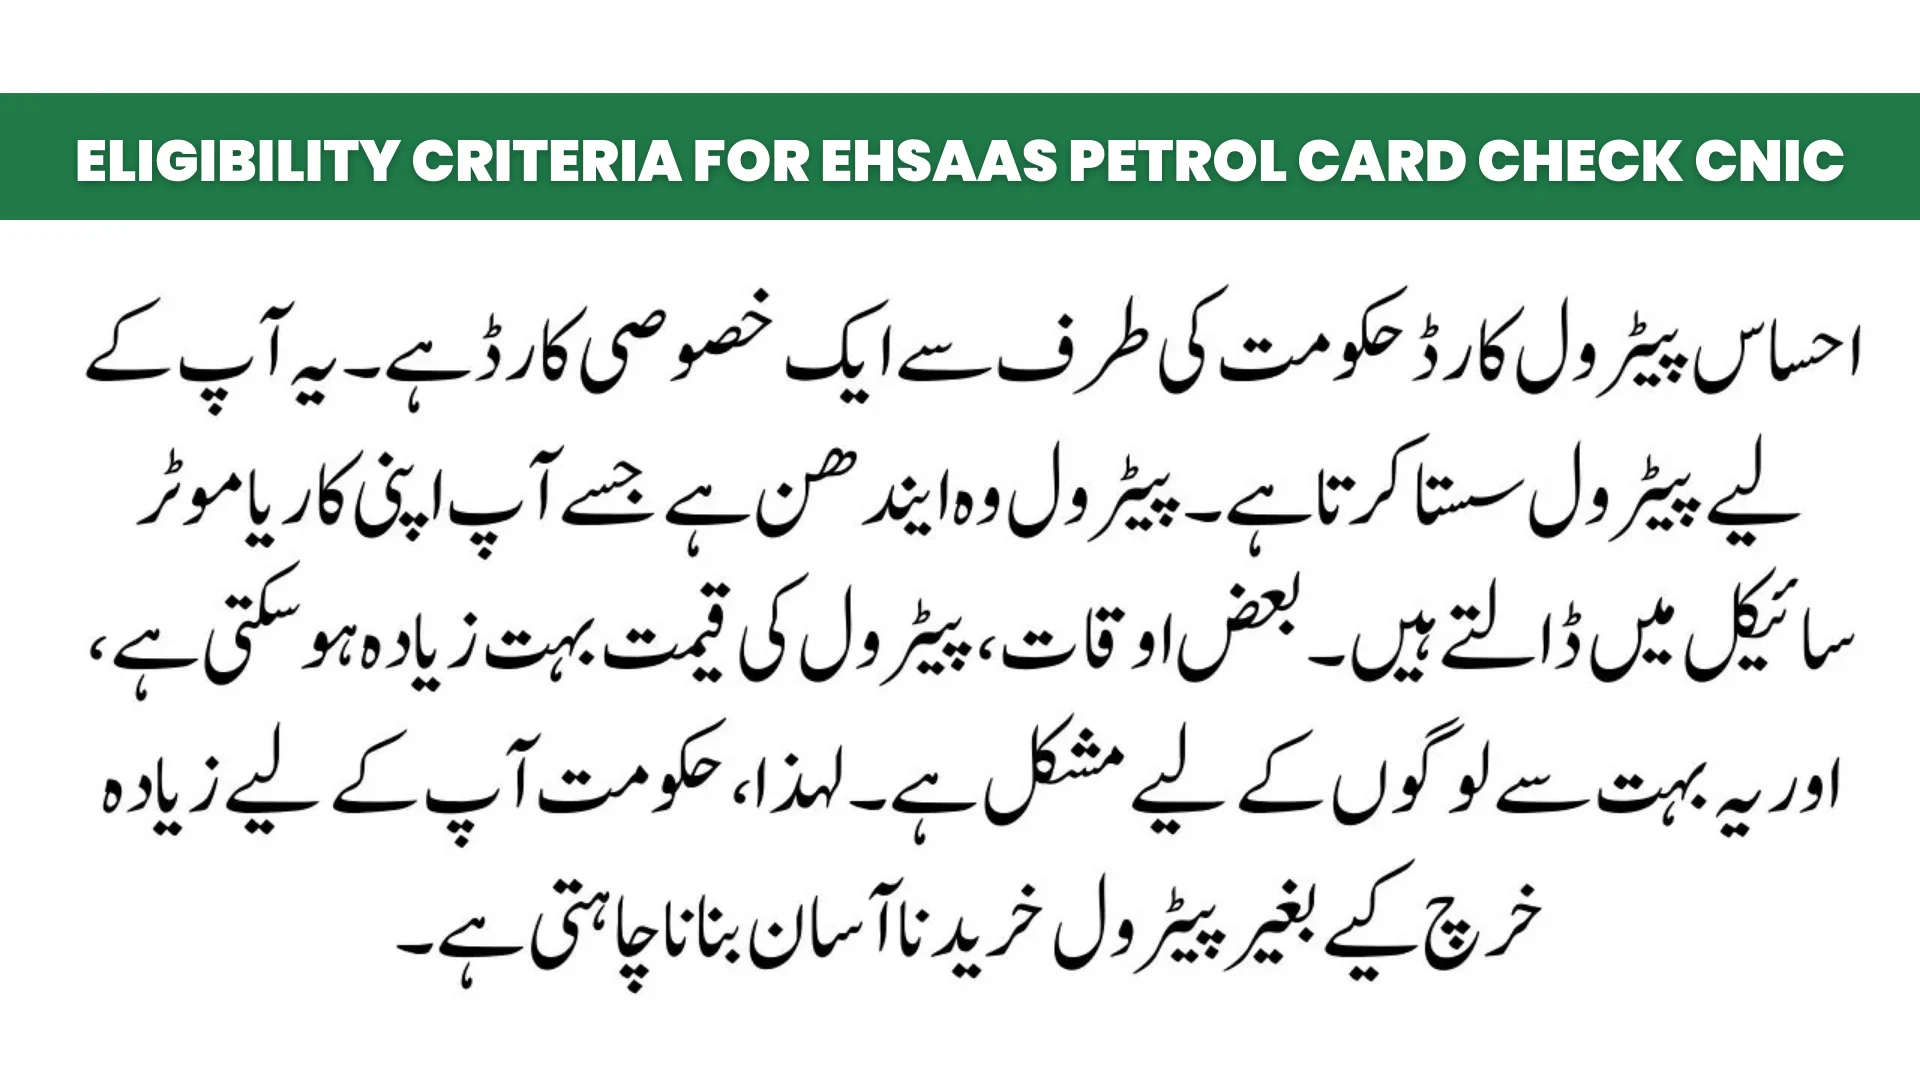 Eligibility Criteria for Ehsaas Petrol Card Check CNIC